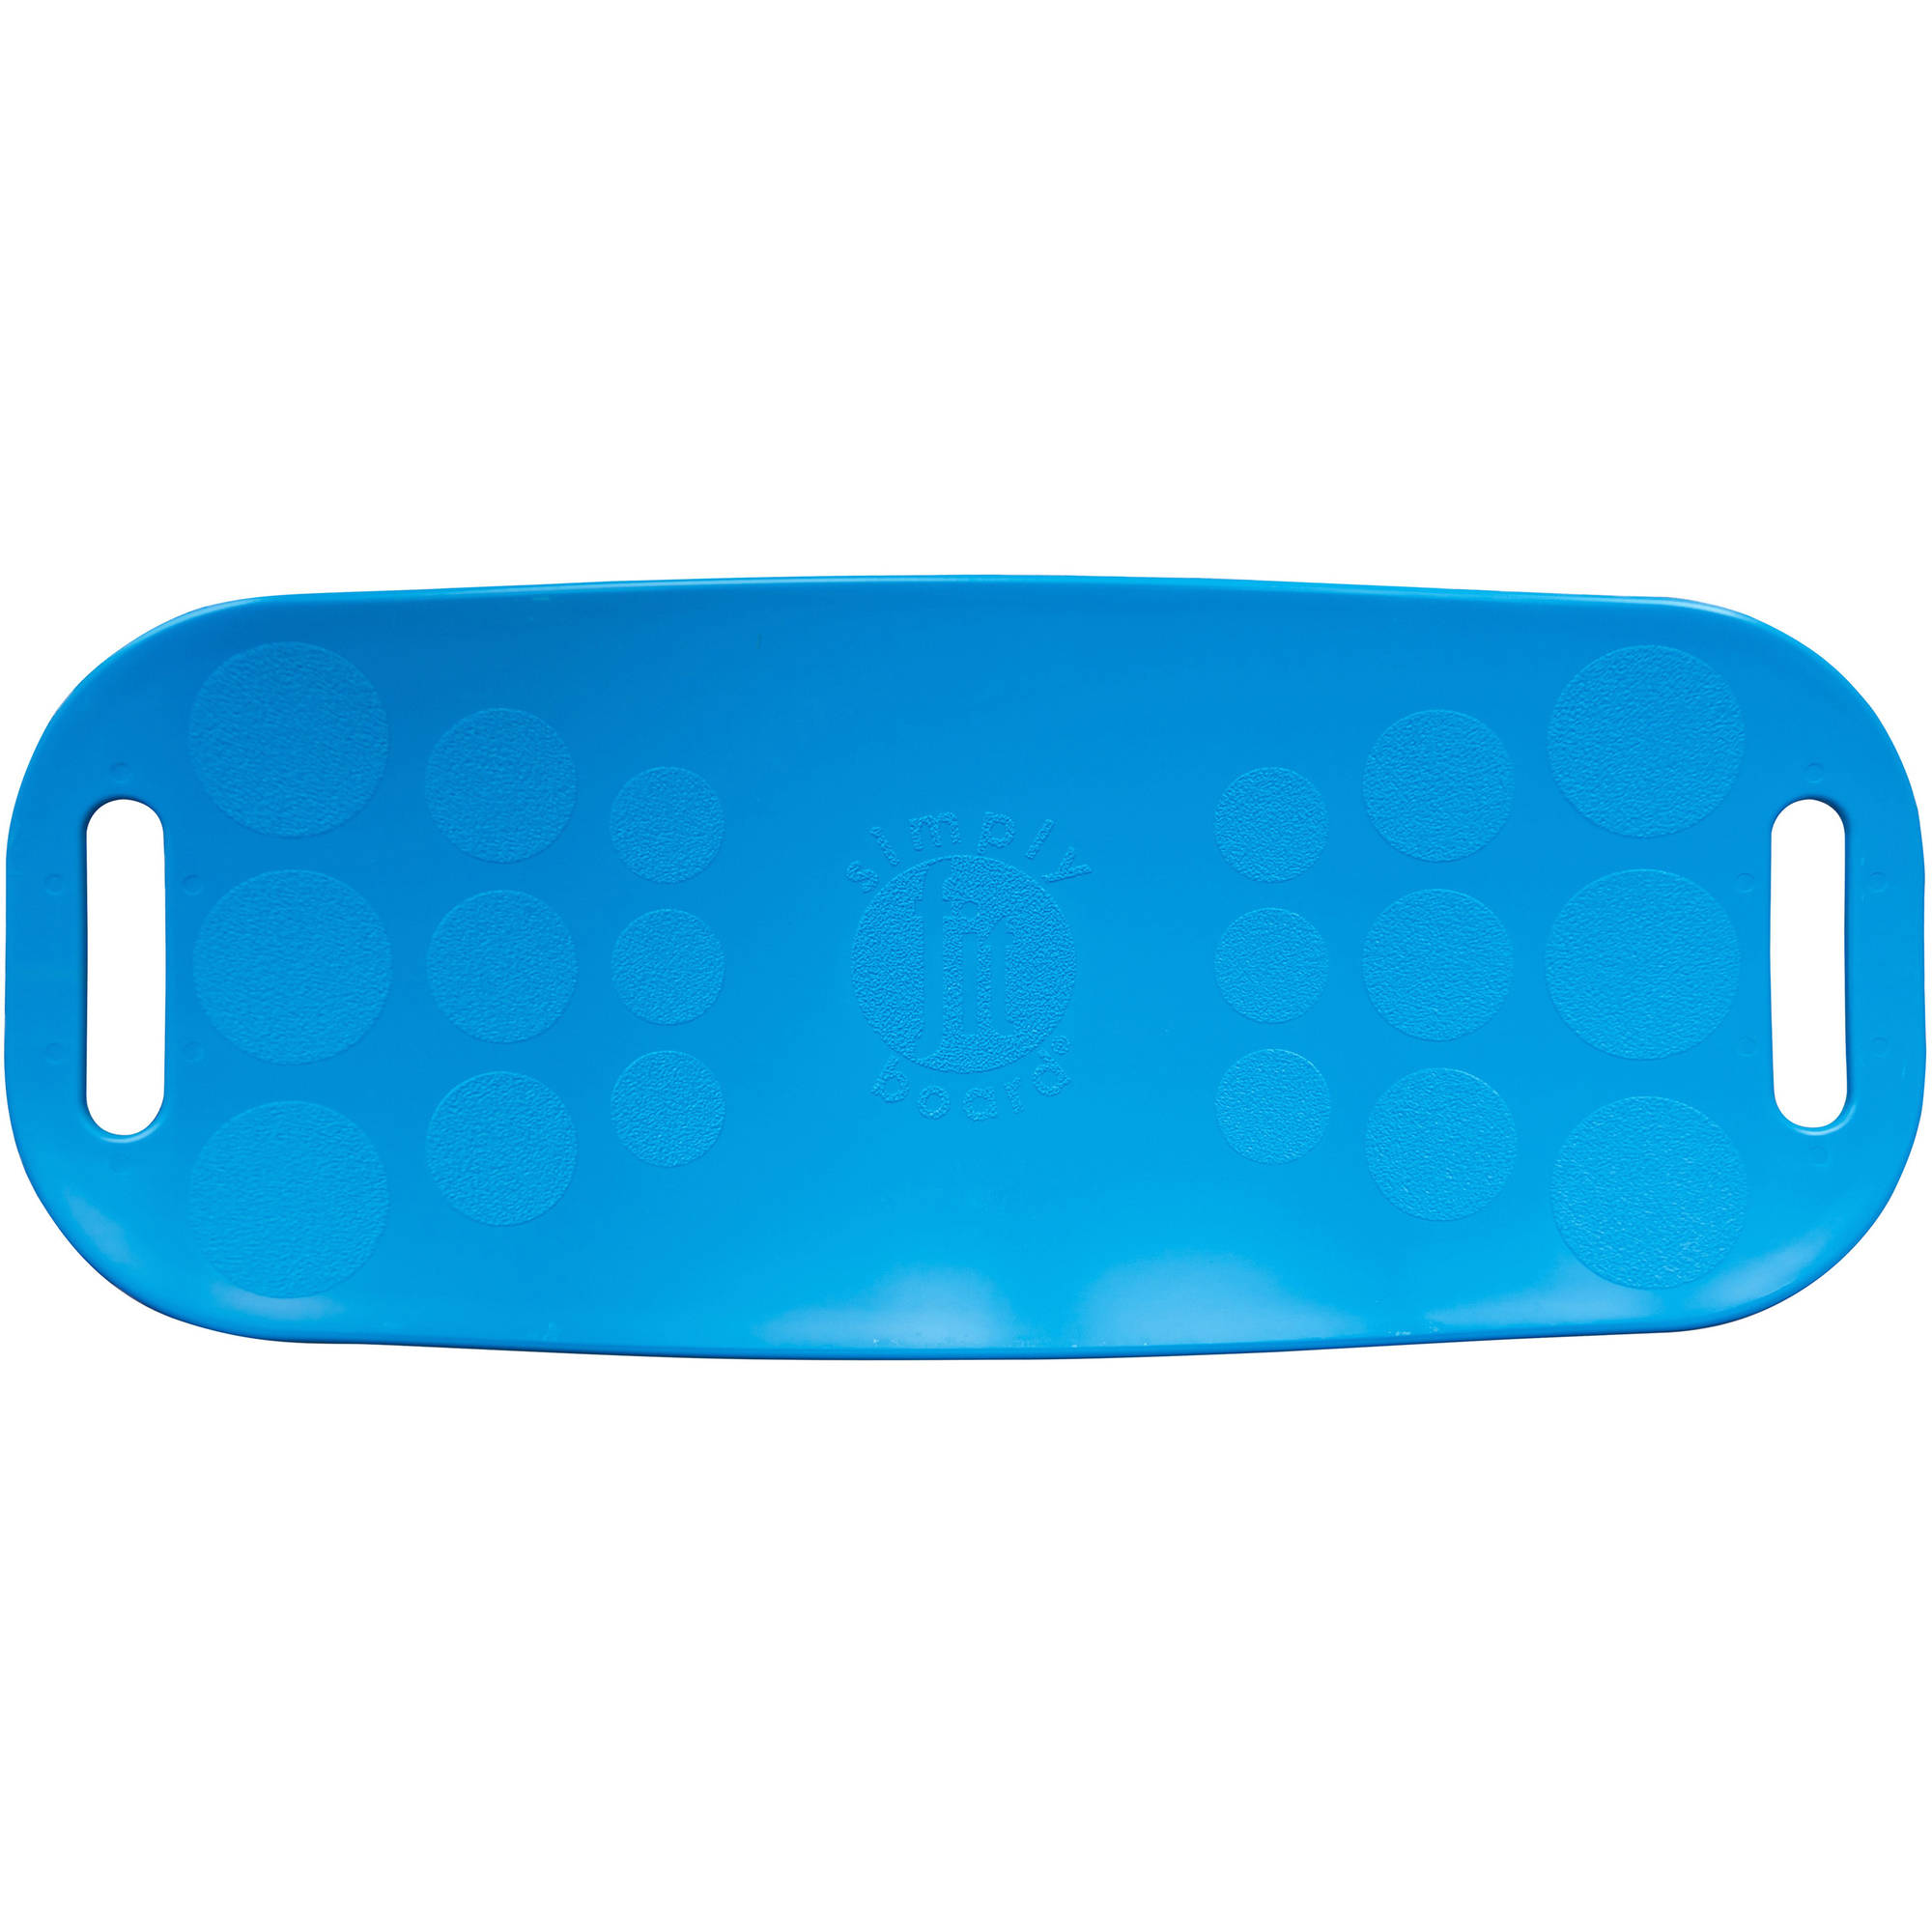 Simply Fit Balance Board, As Seen on TV, Blue - image 4 of 4